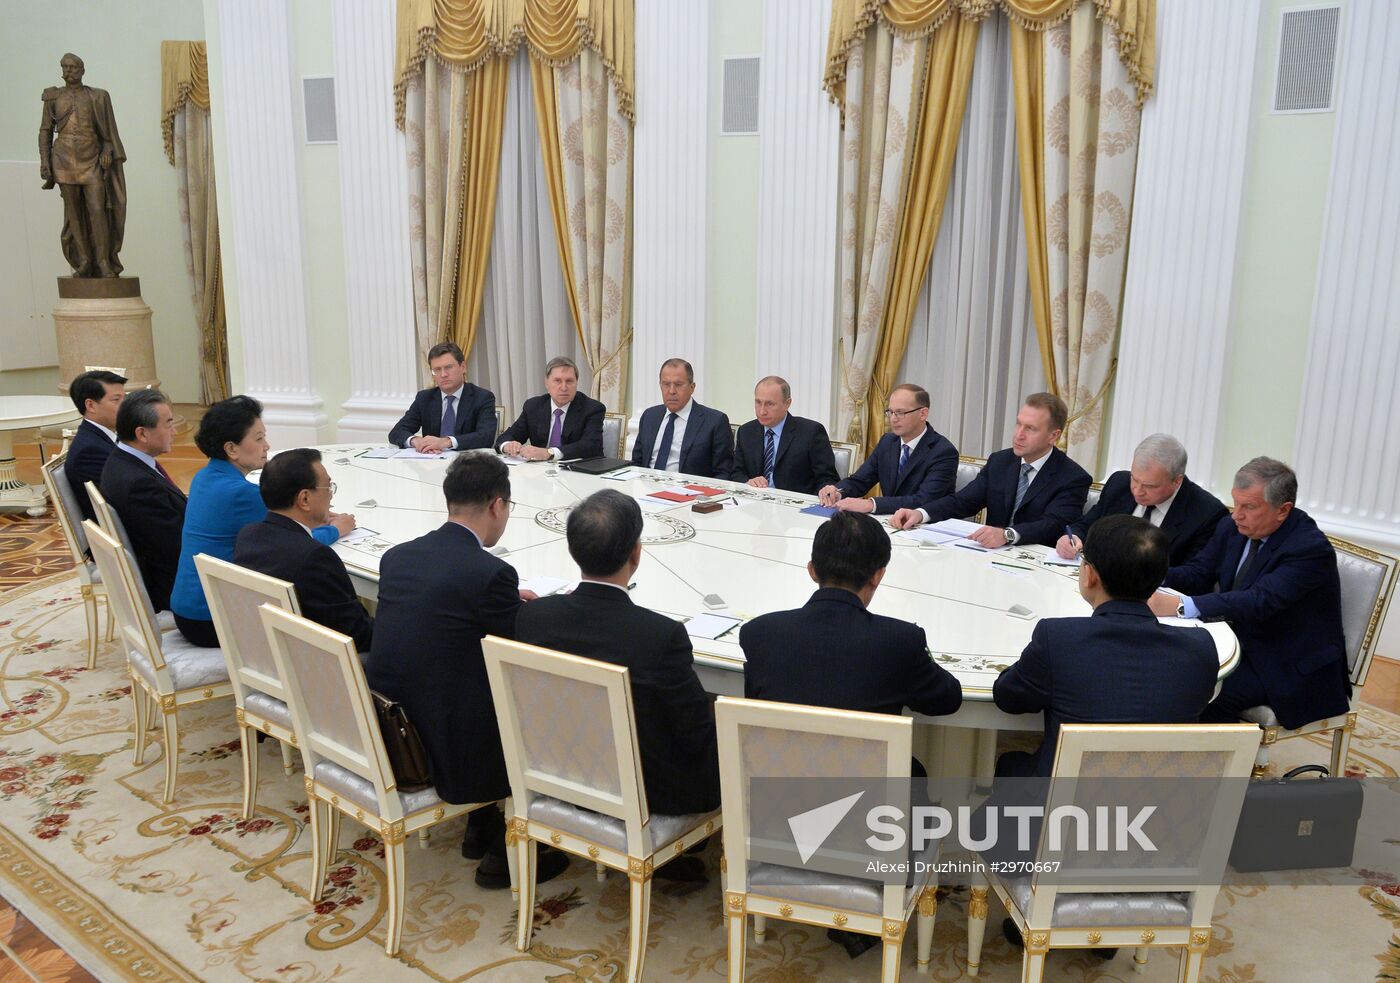 Russian President Vladimir Putin meets with Premier of Chinese State Council Li Keqiang